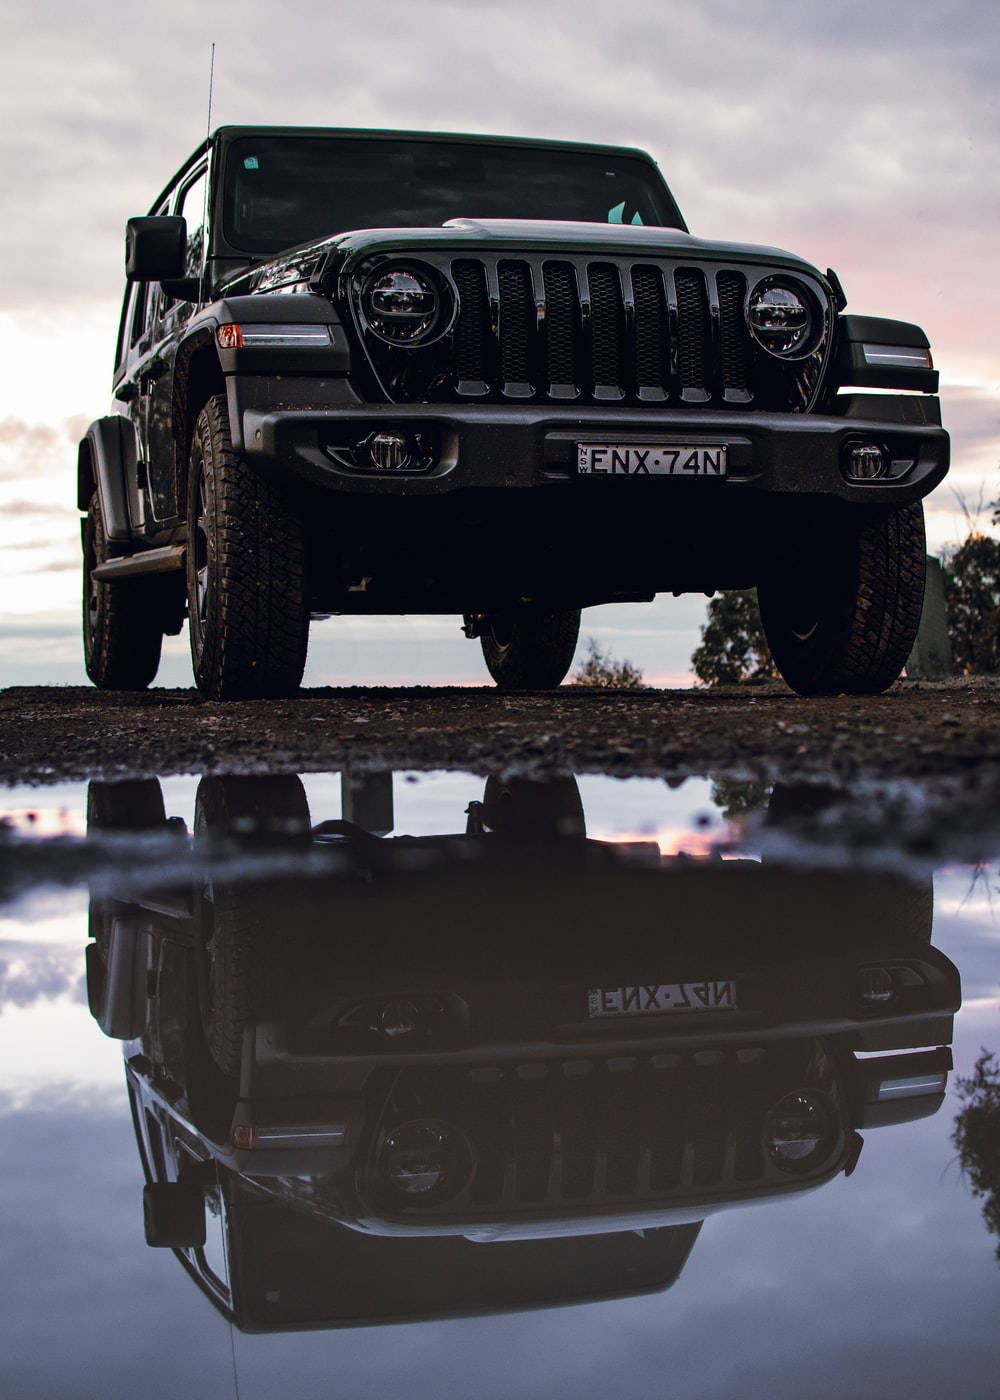 Black Jeep Wrangler Reflection On Water Background